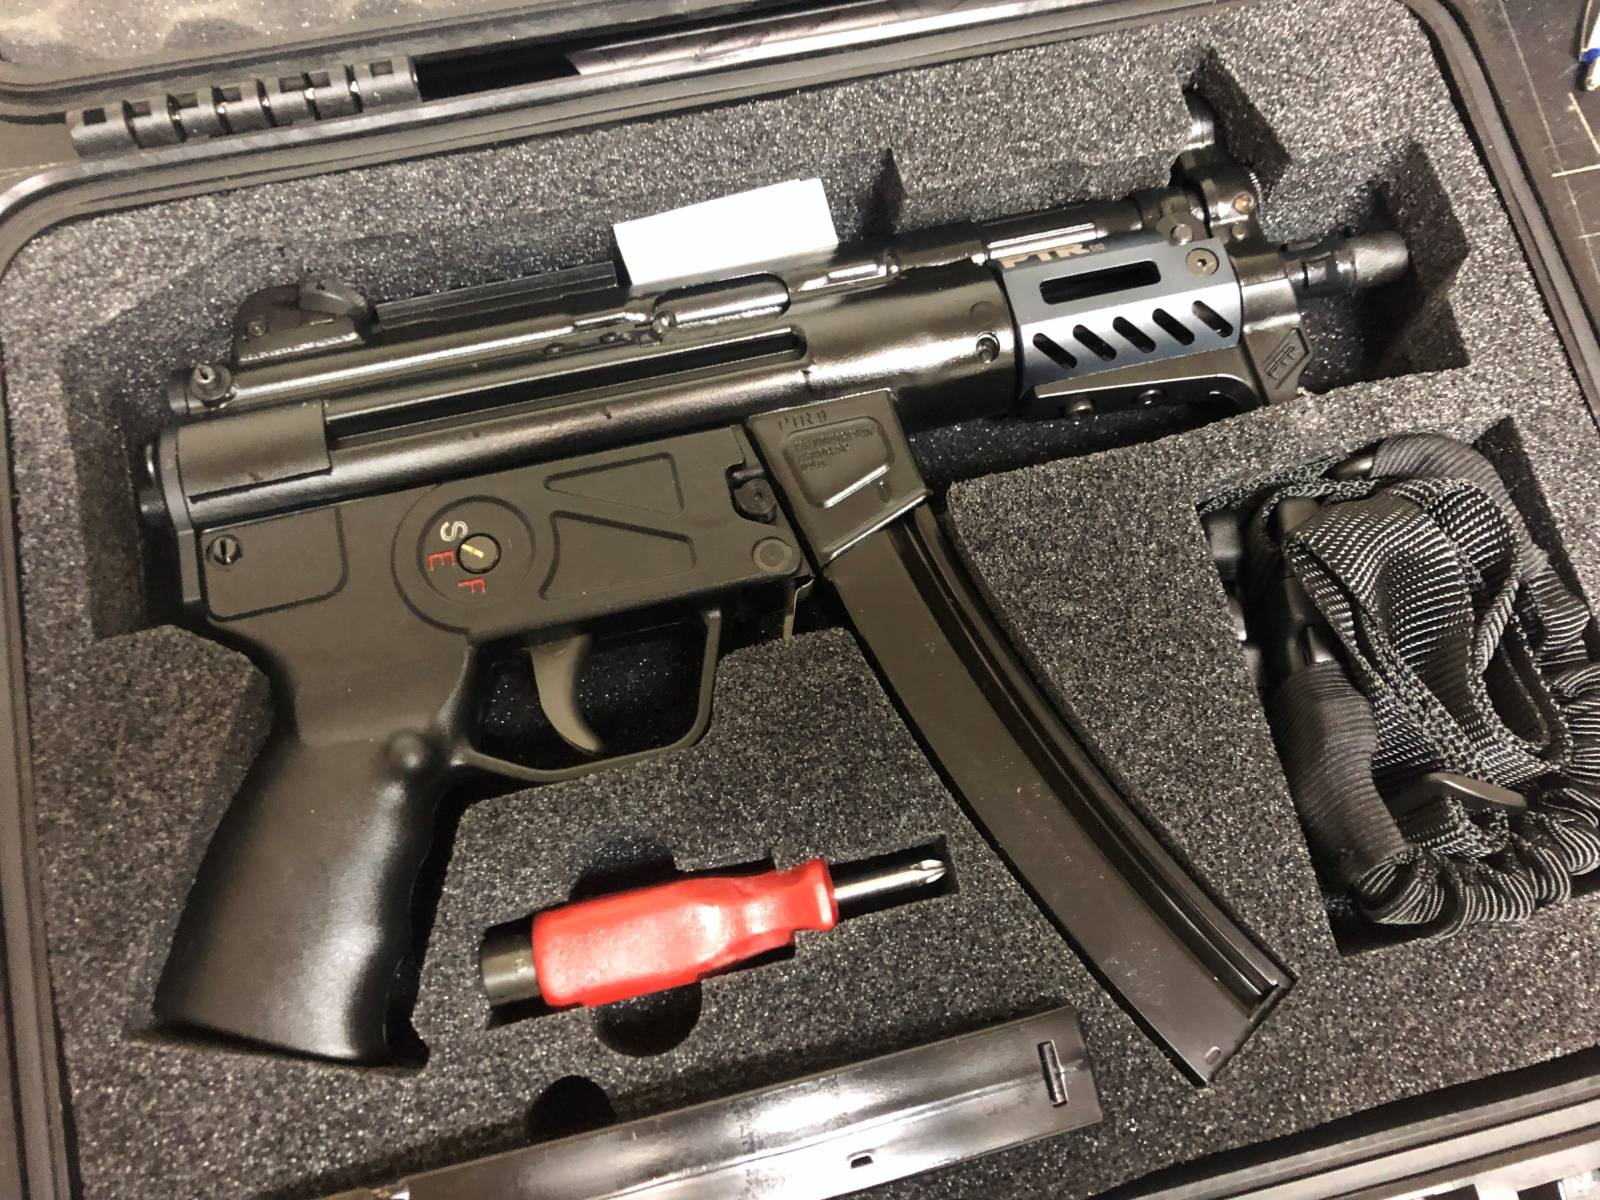 PTR 603 9KT Pistol Semi-Automatic 9mm 5.16 30+1 - $1706.99 (Free S/H over $49)